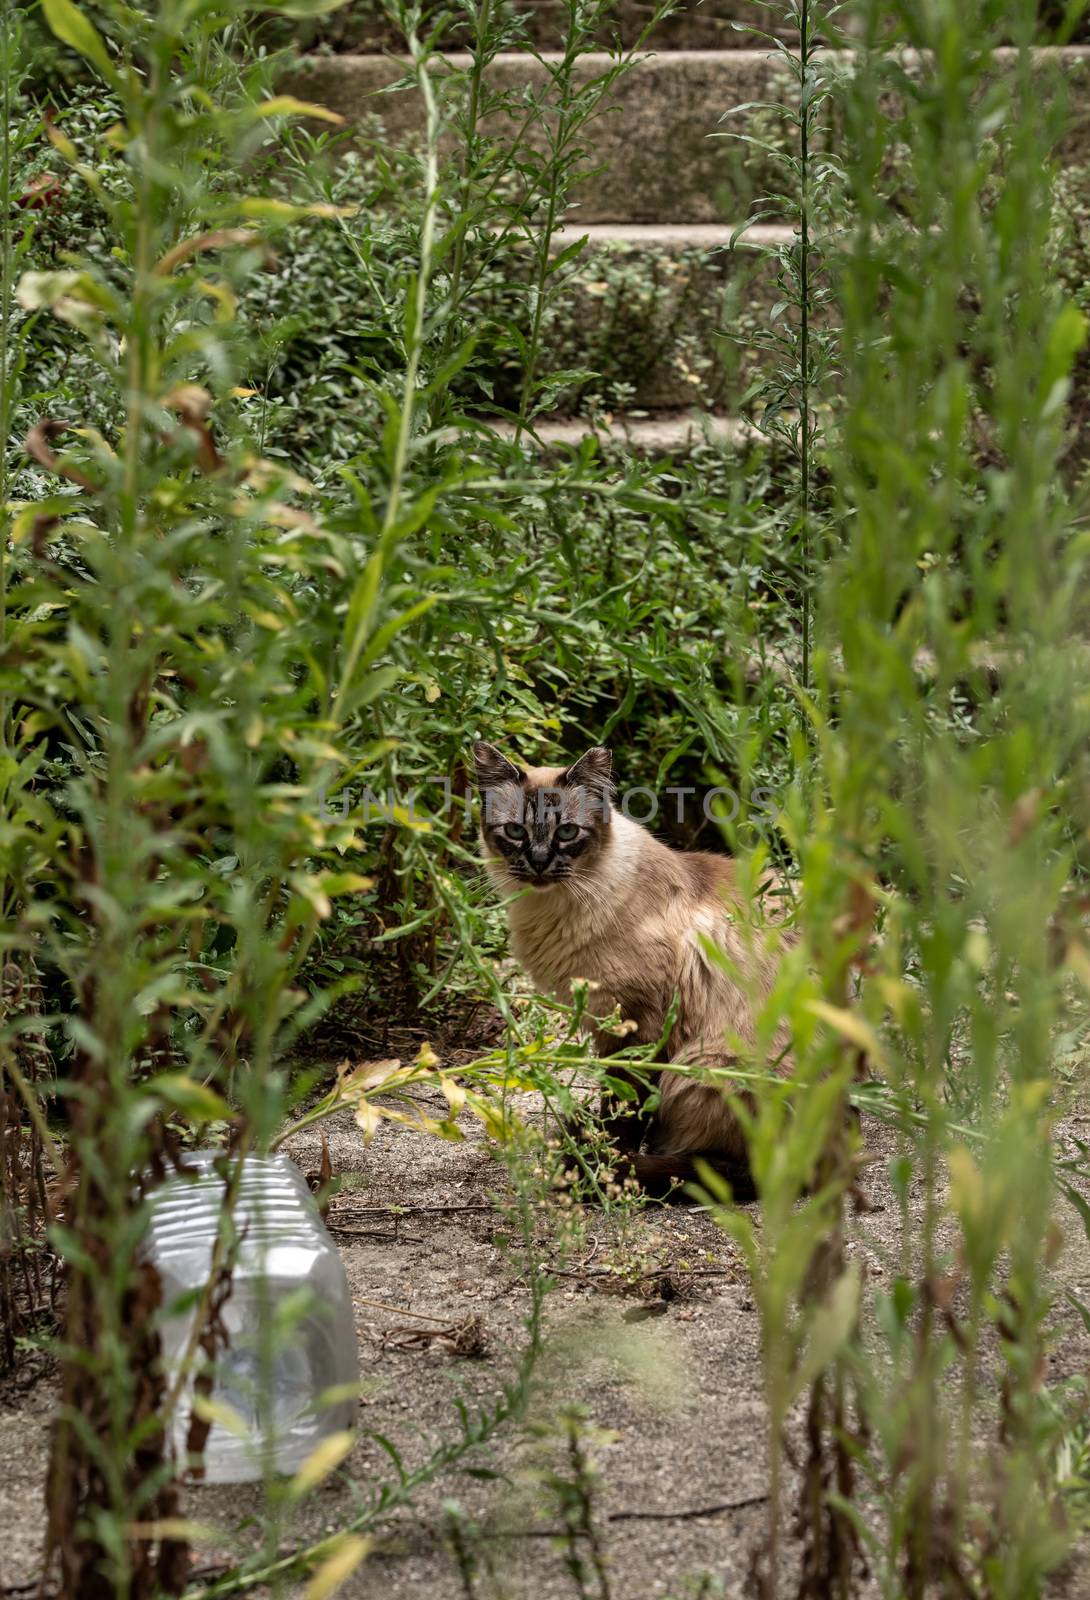 Stray cat looking through overgrown garden and yard in Viseu Portugal by steheap